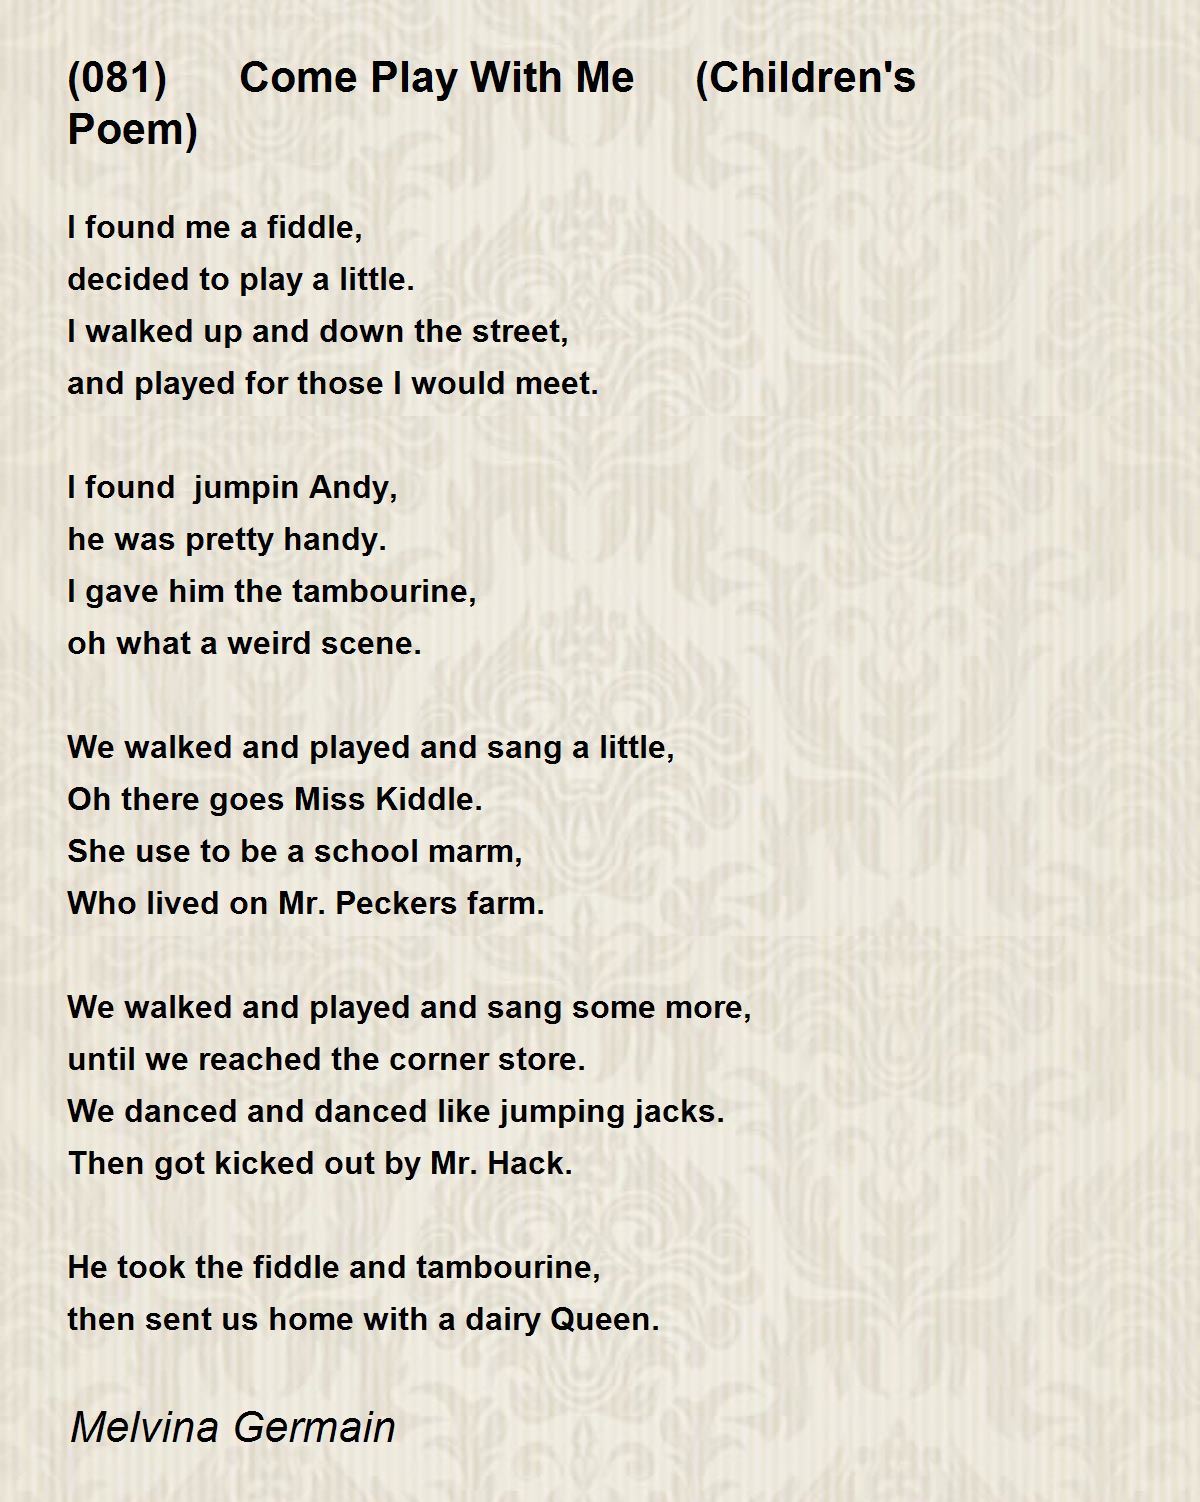 081) Come Play With Me (Children's Poem) - (081) Come Play With Me